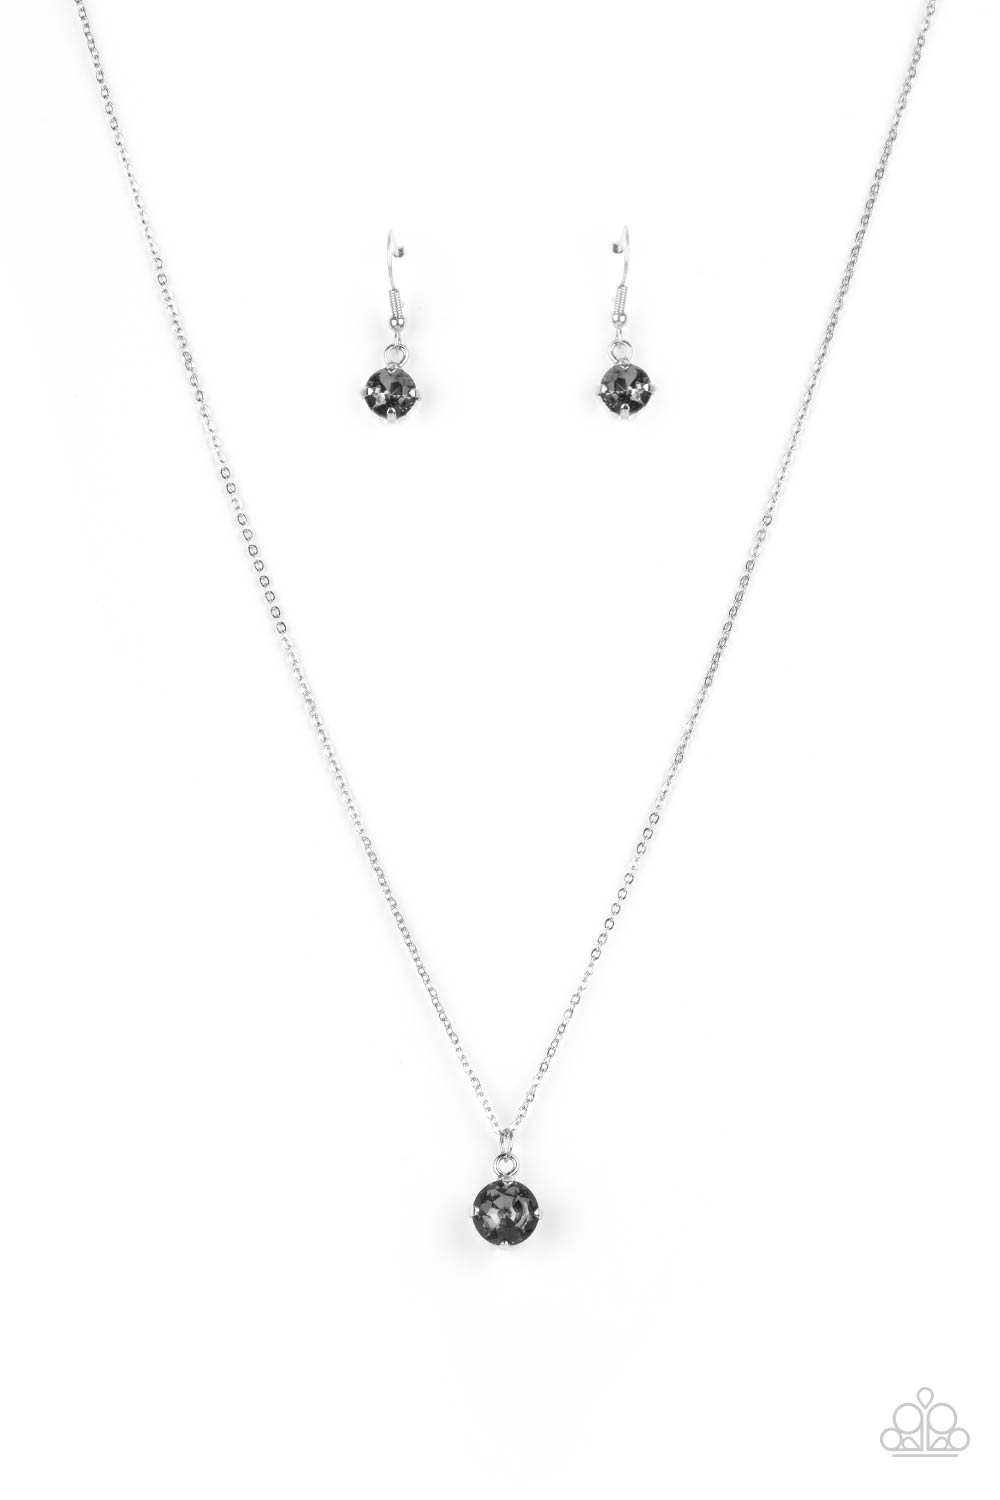 Undeniably Demure Necklace (Blue, Silver)